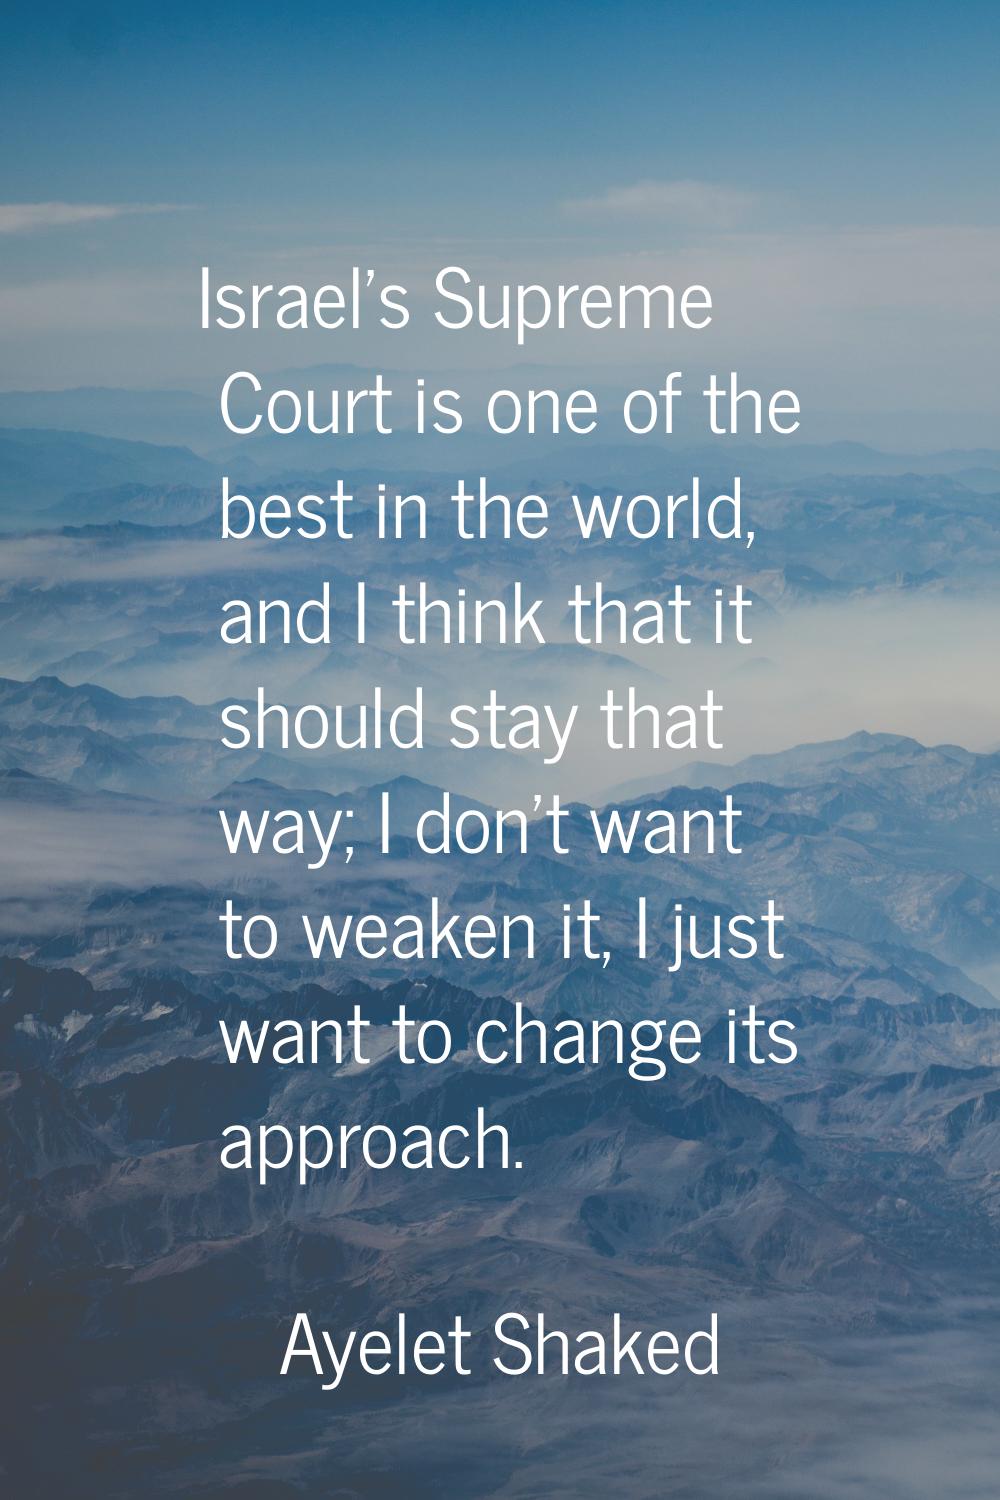 Israel's Supreme Court is one of the best in the world, and I think that it should stay that way; I